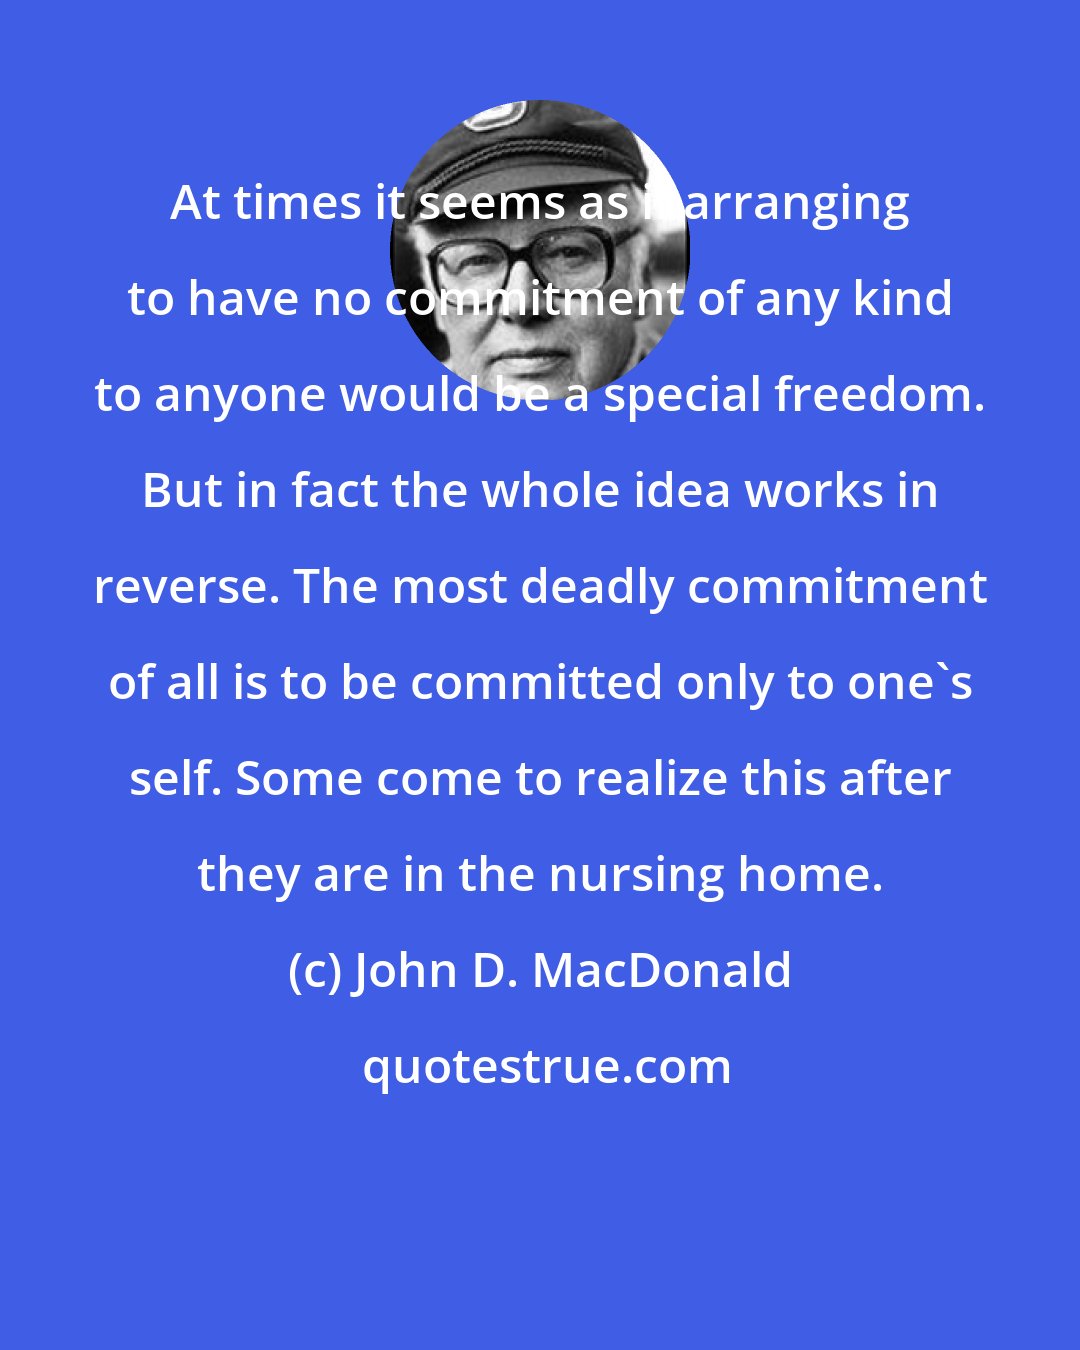 John D. MacDonald: At times it seems as if arranging to have no commitment of any kind to anyone would be a special freedom. But in fact the whole idea works in reverse. The most deadly commitment of all is to be committed only to one's self. Some come to realize this after they are in the nursing home.